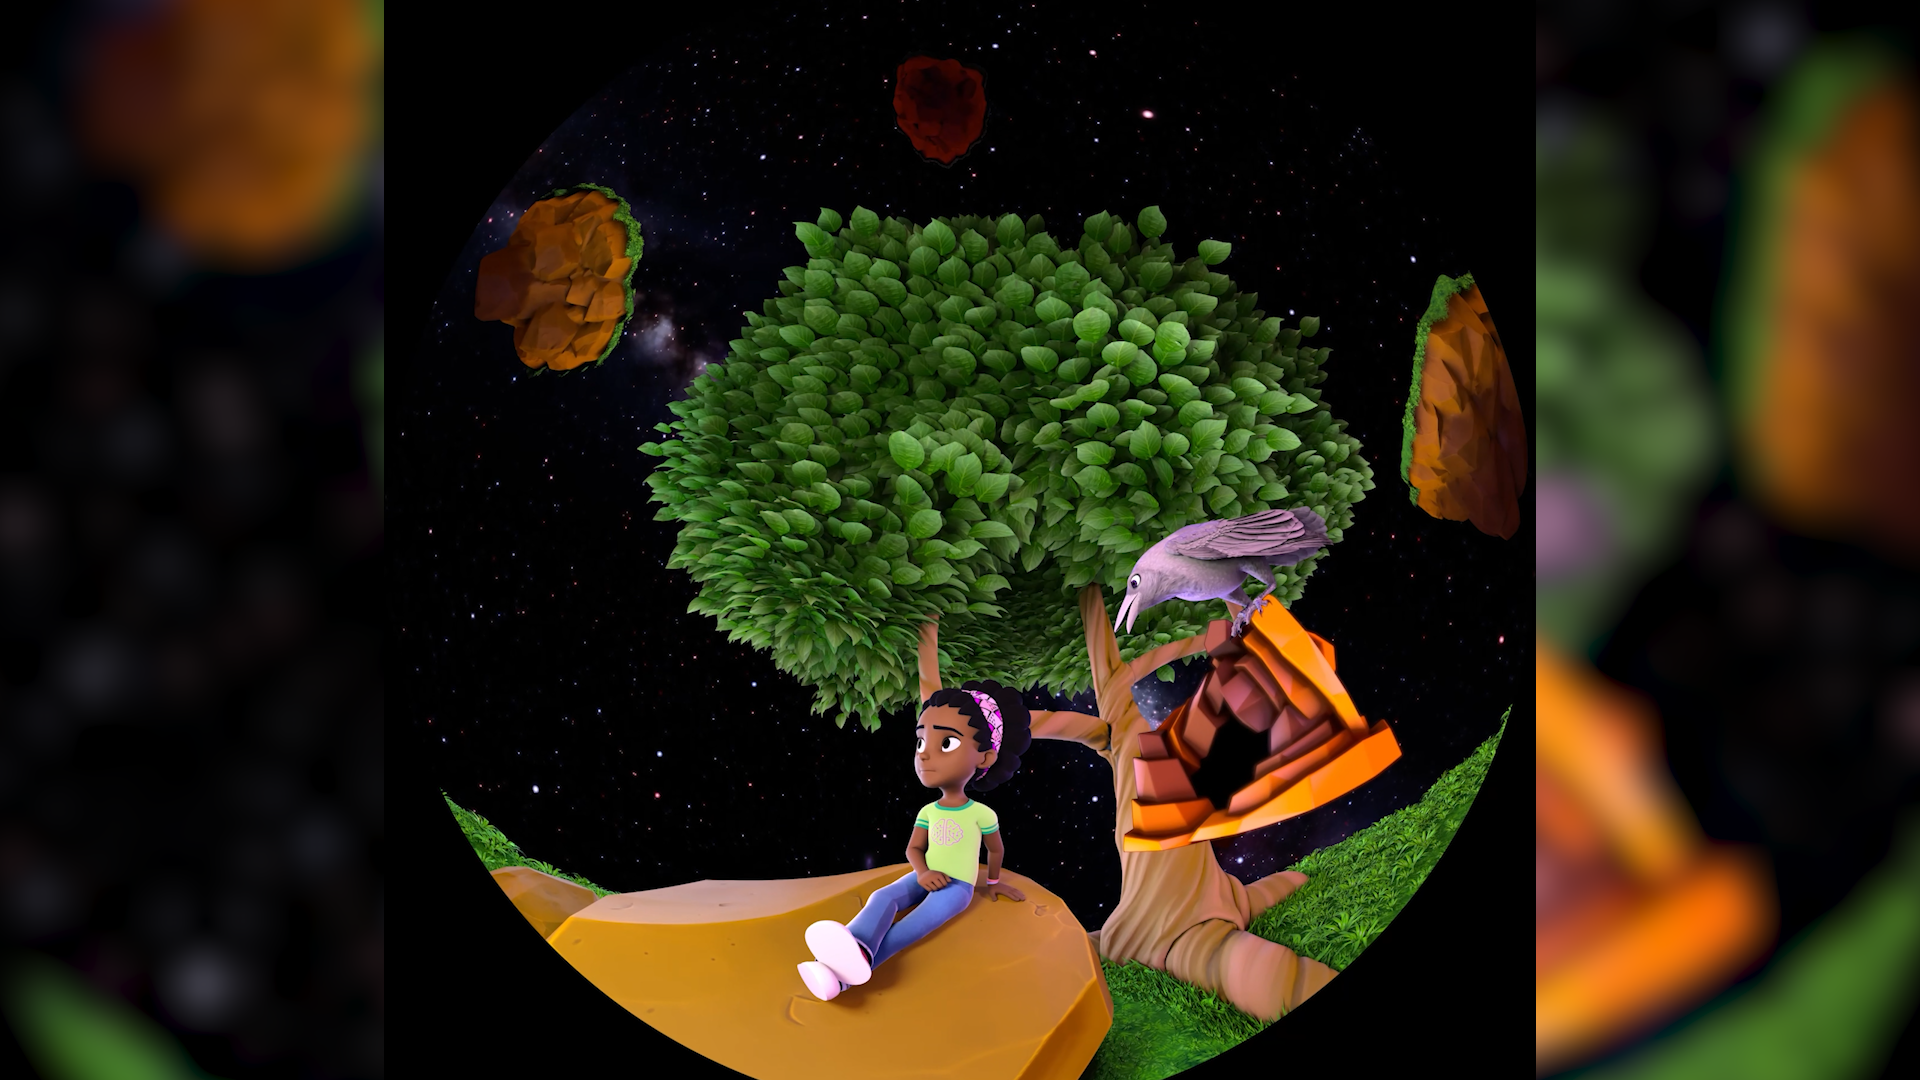 Morehead Planetarium and Science Center’s newest fulldome film, “Mysteries of Your Brain” follows a young girl and her crow as they explore what makes the human brain unique. (Image courtesy of Morehead Planetarium and Science Center)